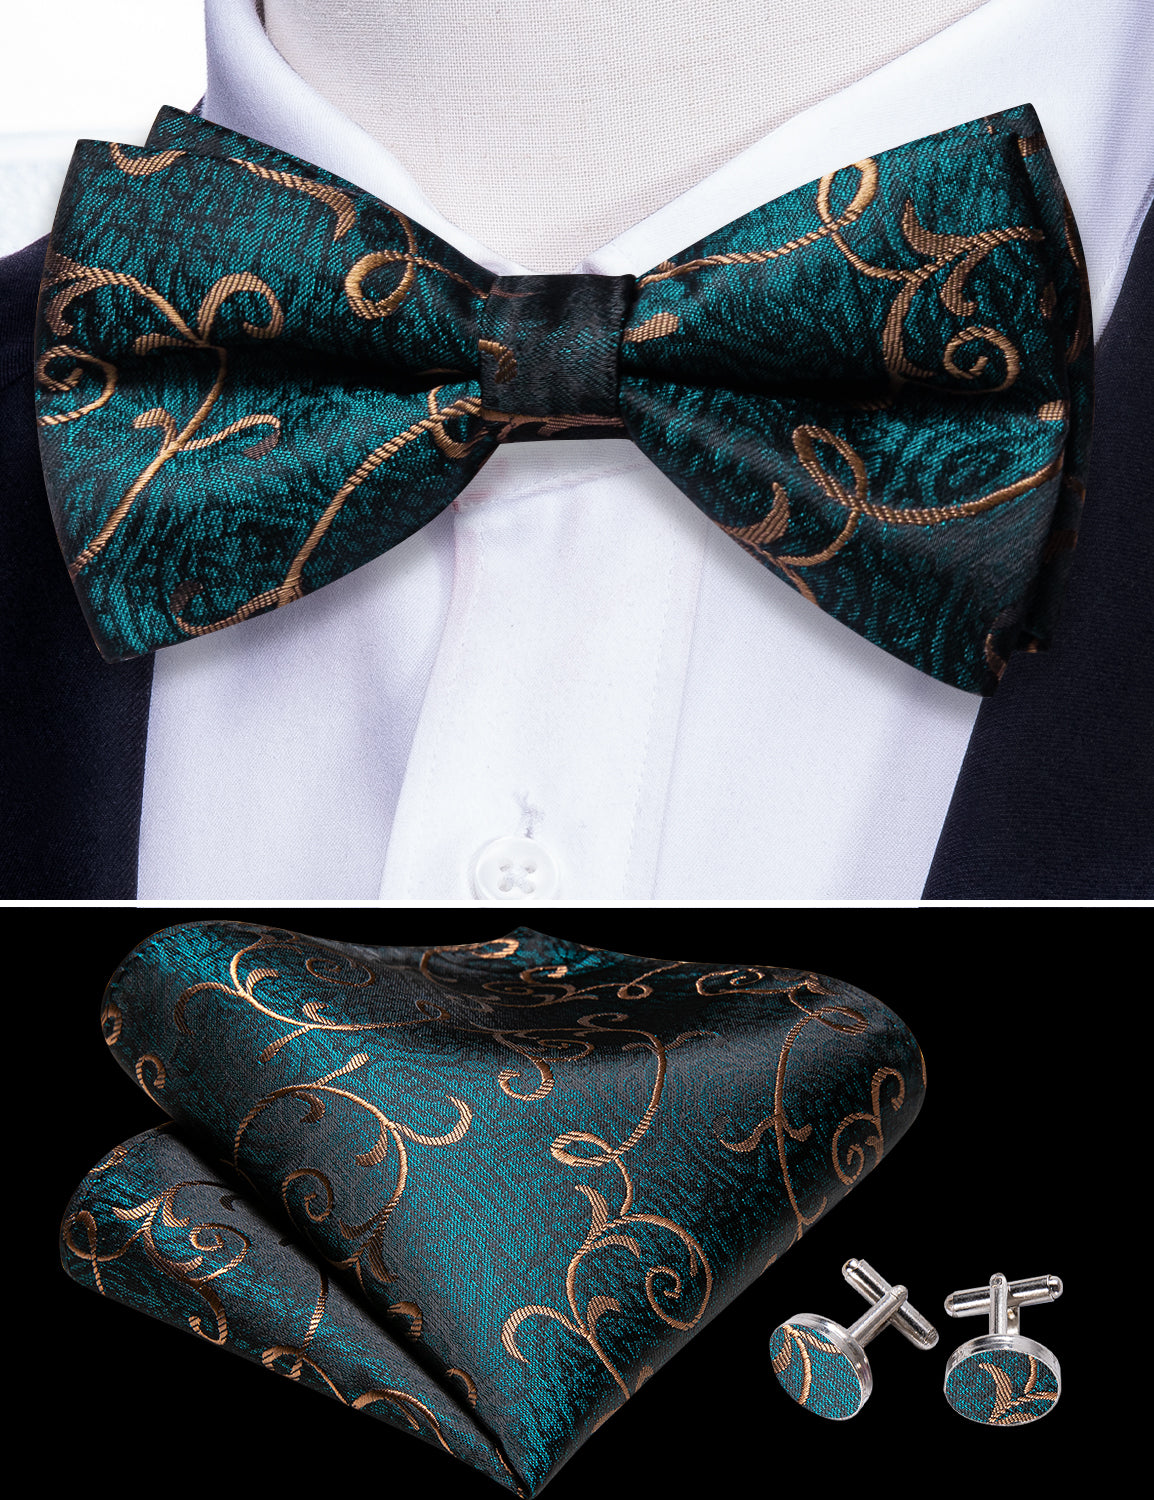 Barry.wang Blue Tie Gold Jacquard Floral Pre-tied Bow Tie Formal